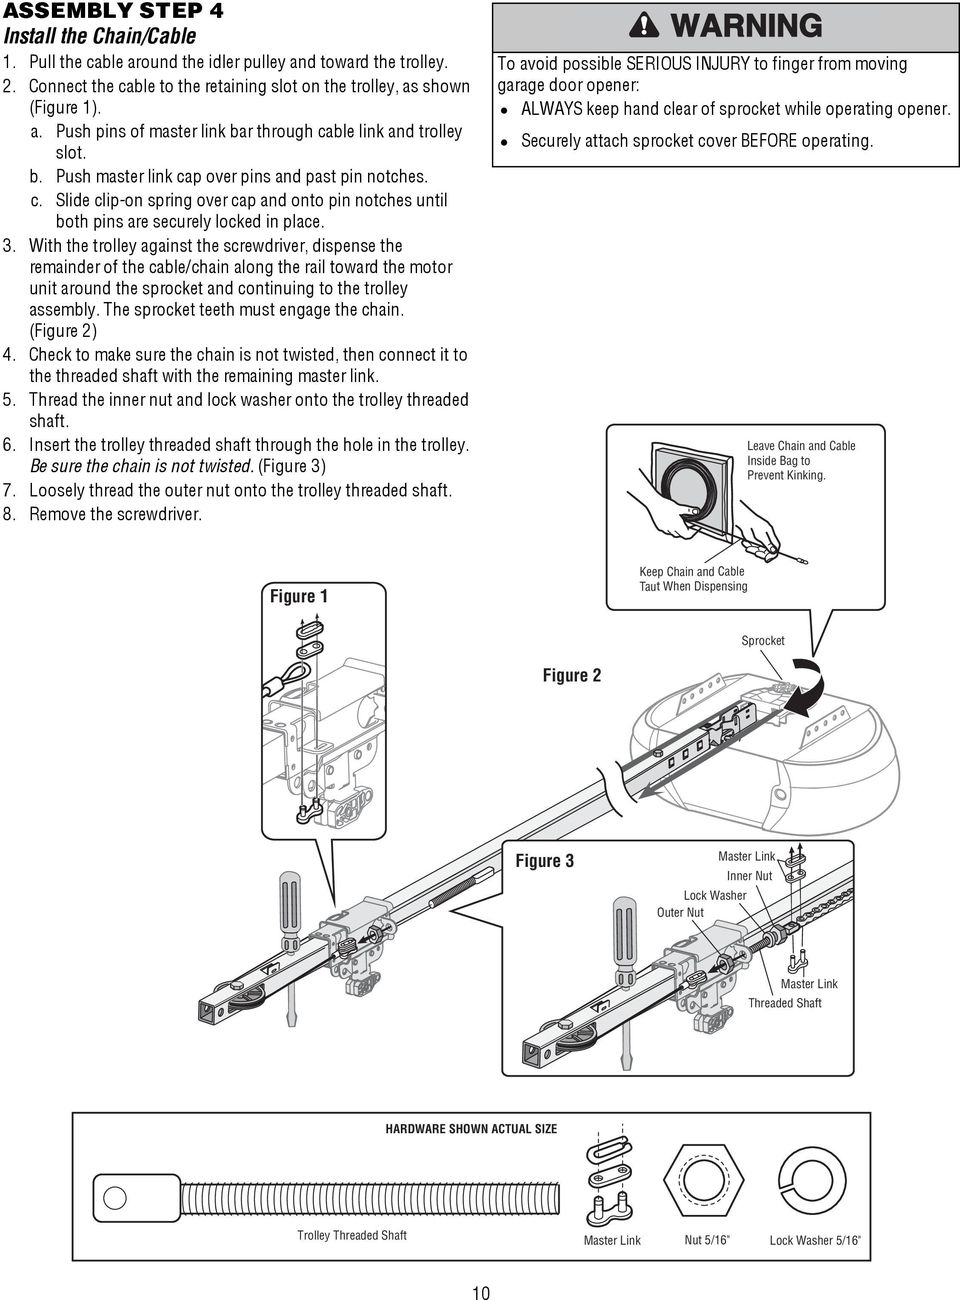 With the trolley against the screwdriver, dispense the remainder of the cable/chain along the rail toward the motor unit around the sprocket and continuing to the trolley assembly.